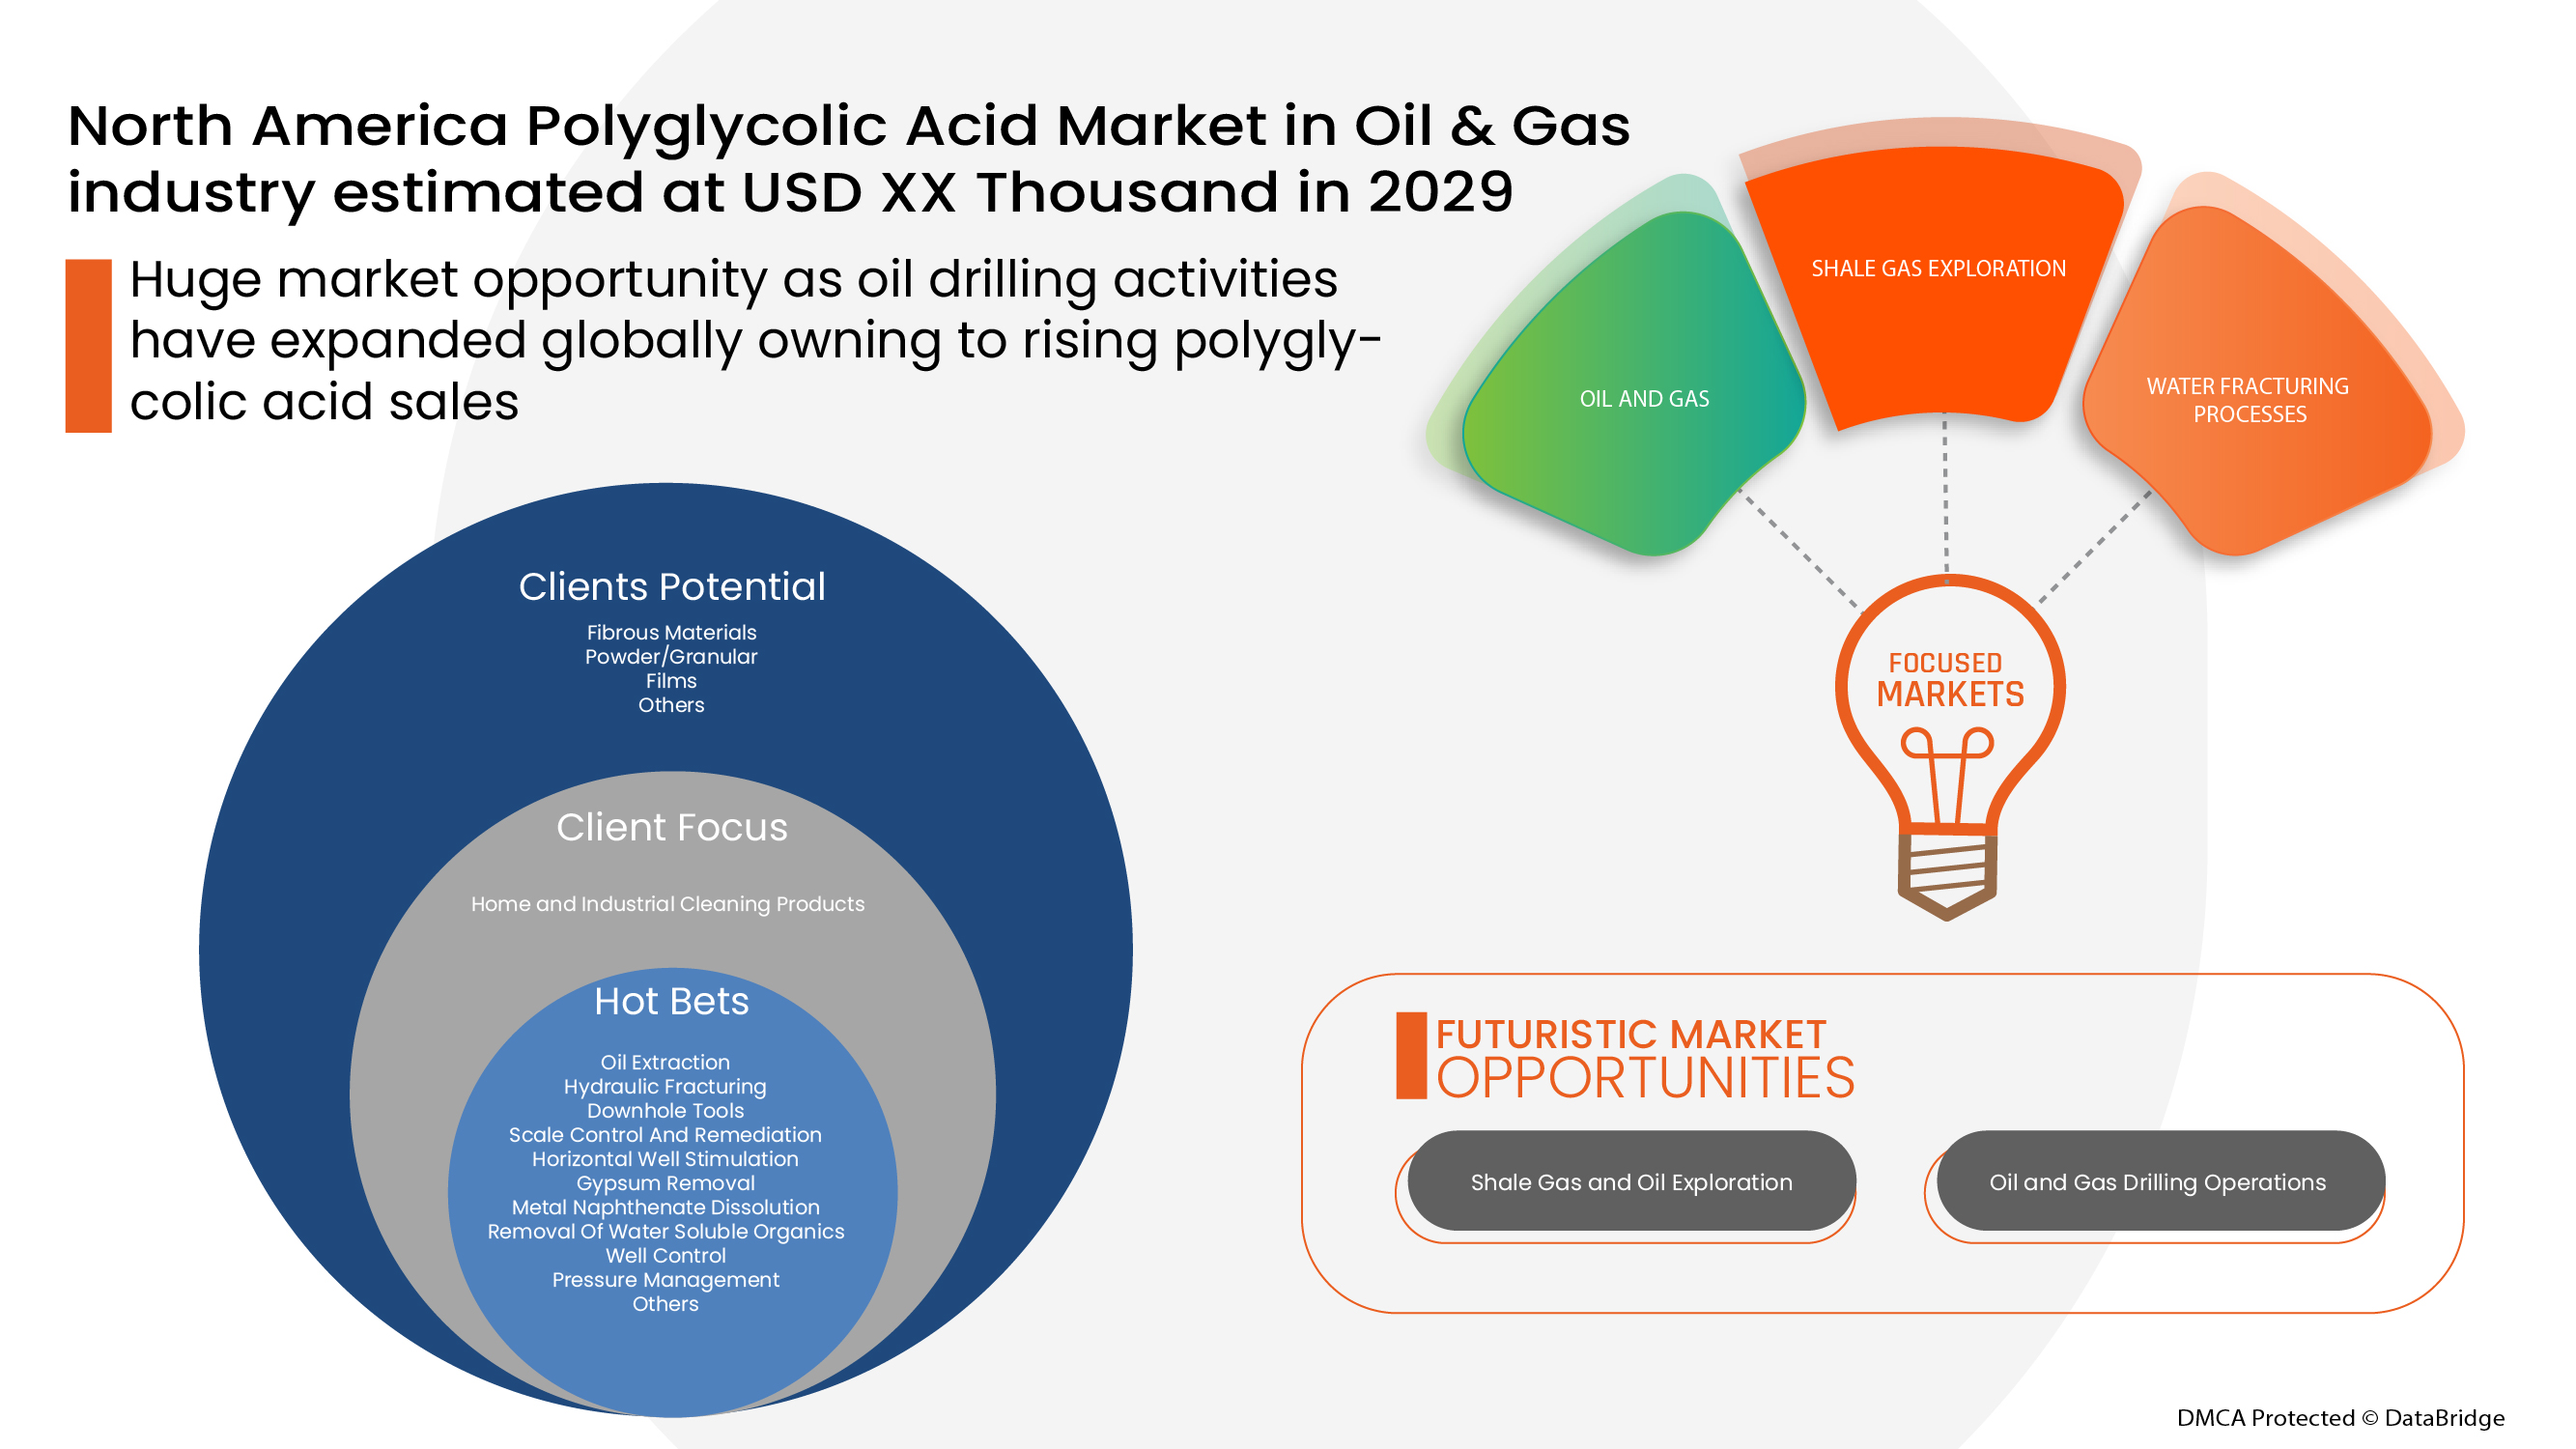 North America Polyglycolic Acid Market in Oil and Gas industry